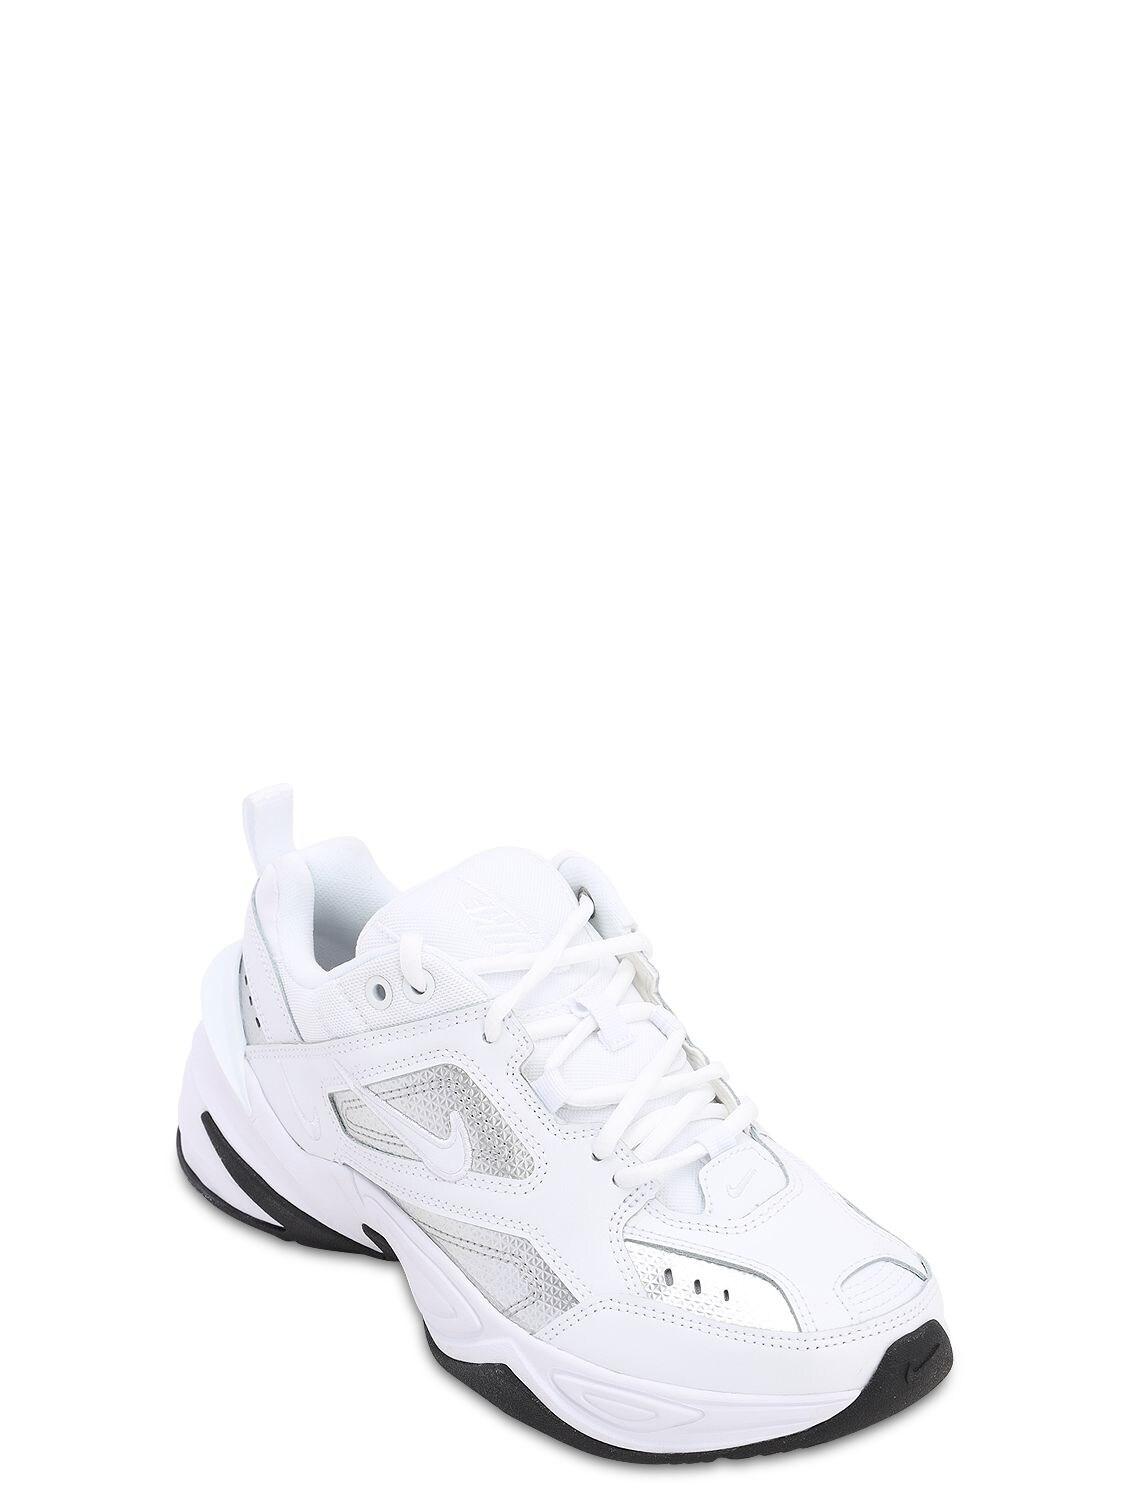 Nike White & Silver M2k Tekno Trainers | Lyst Canada